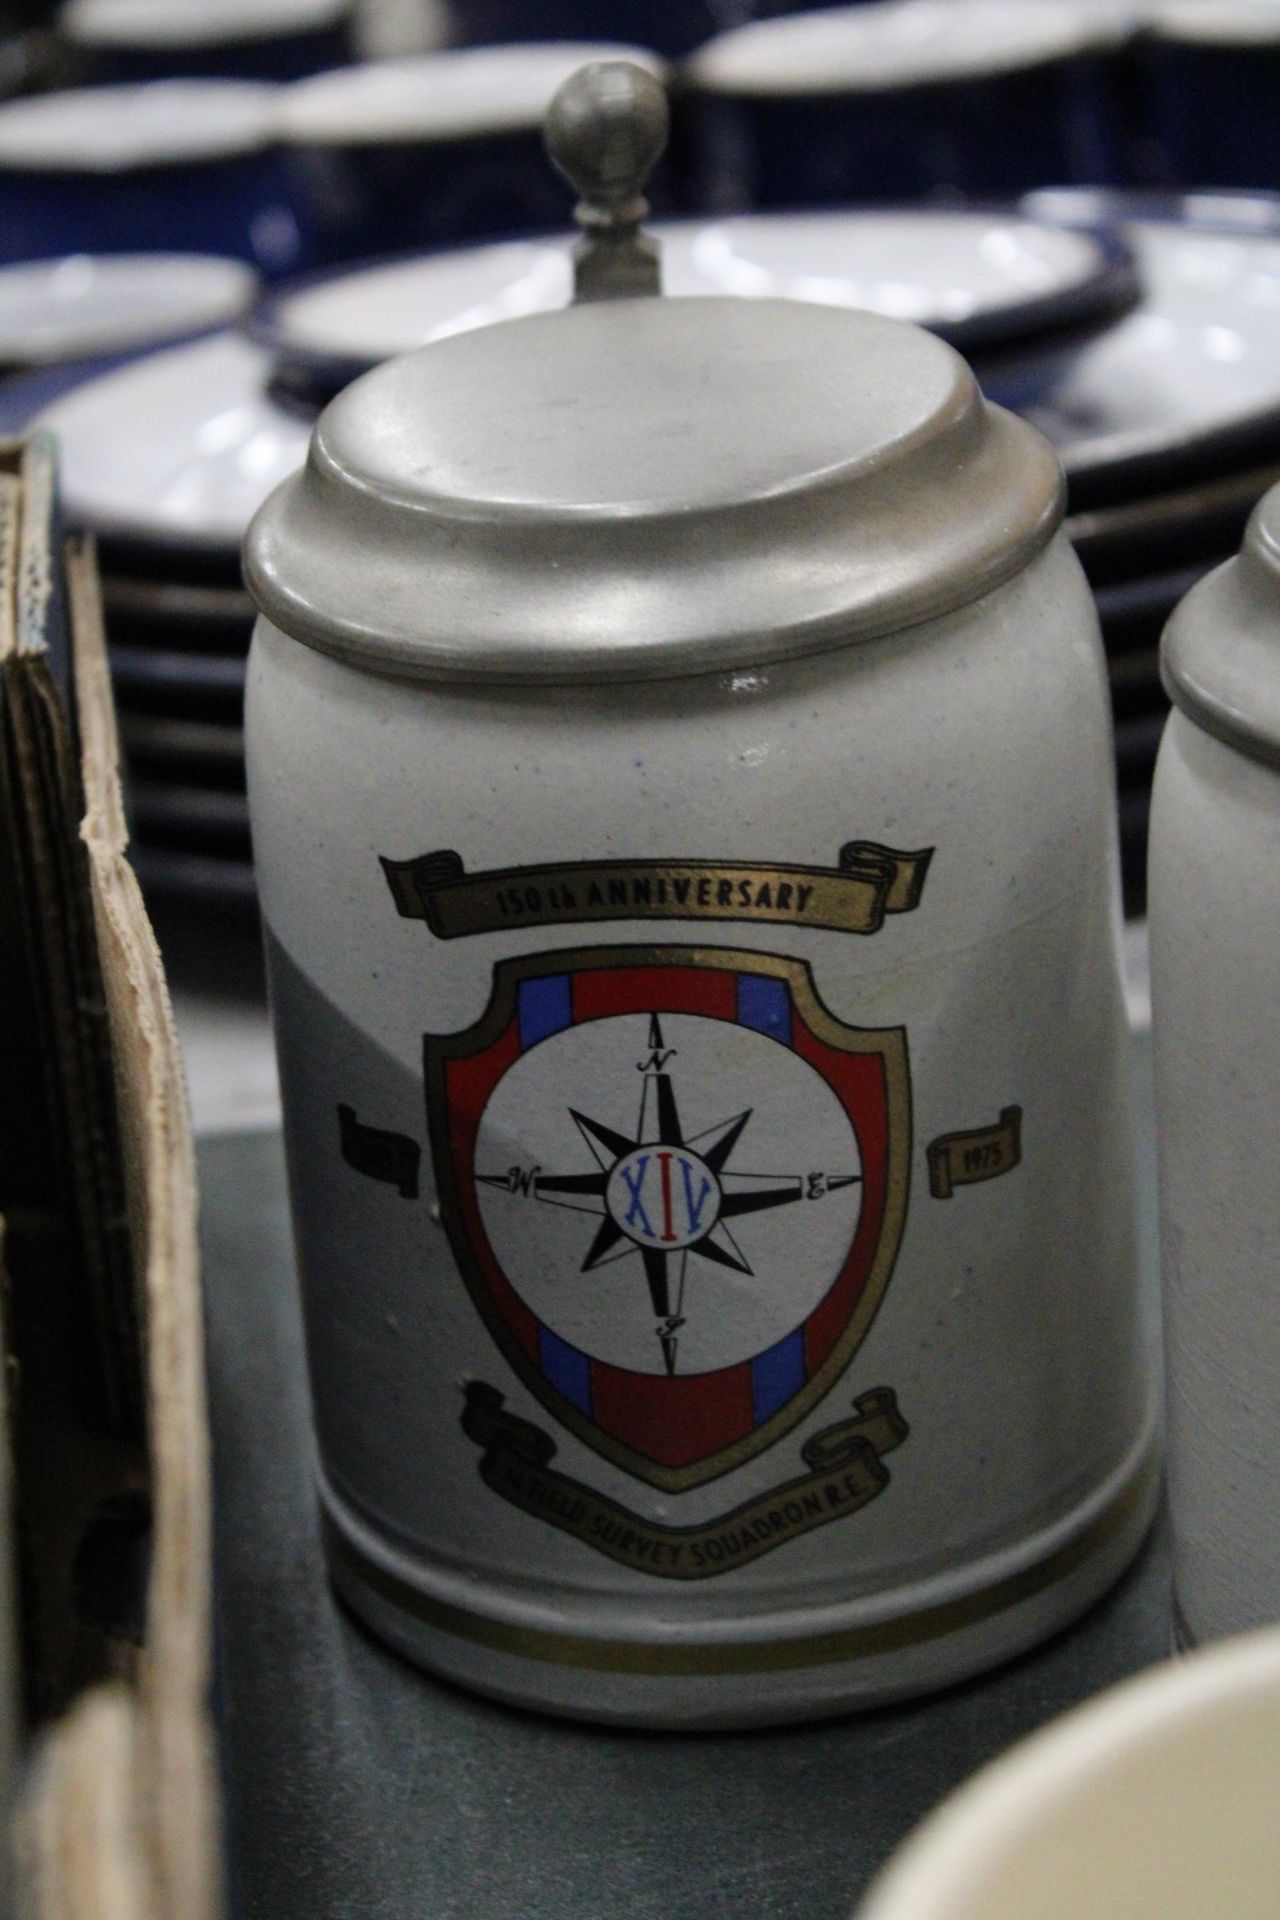 A PAIR OF STONEWARE PEWTER LIDDED MILITARY STEINS - 14 FIELD SURVEY SQUADRON RE - Image 4 of 6